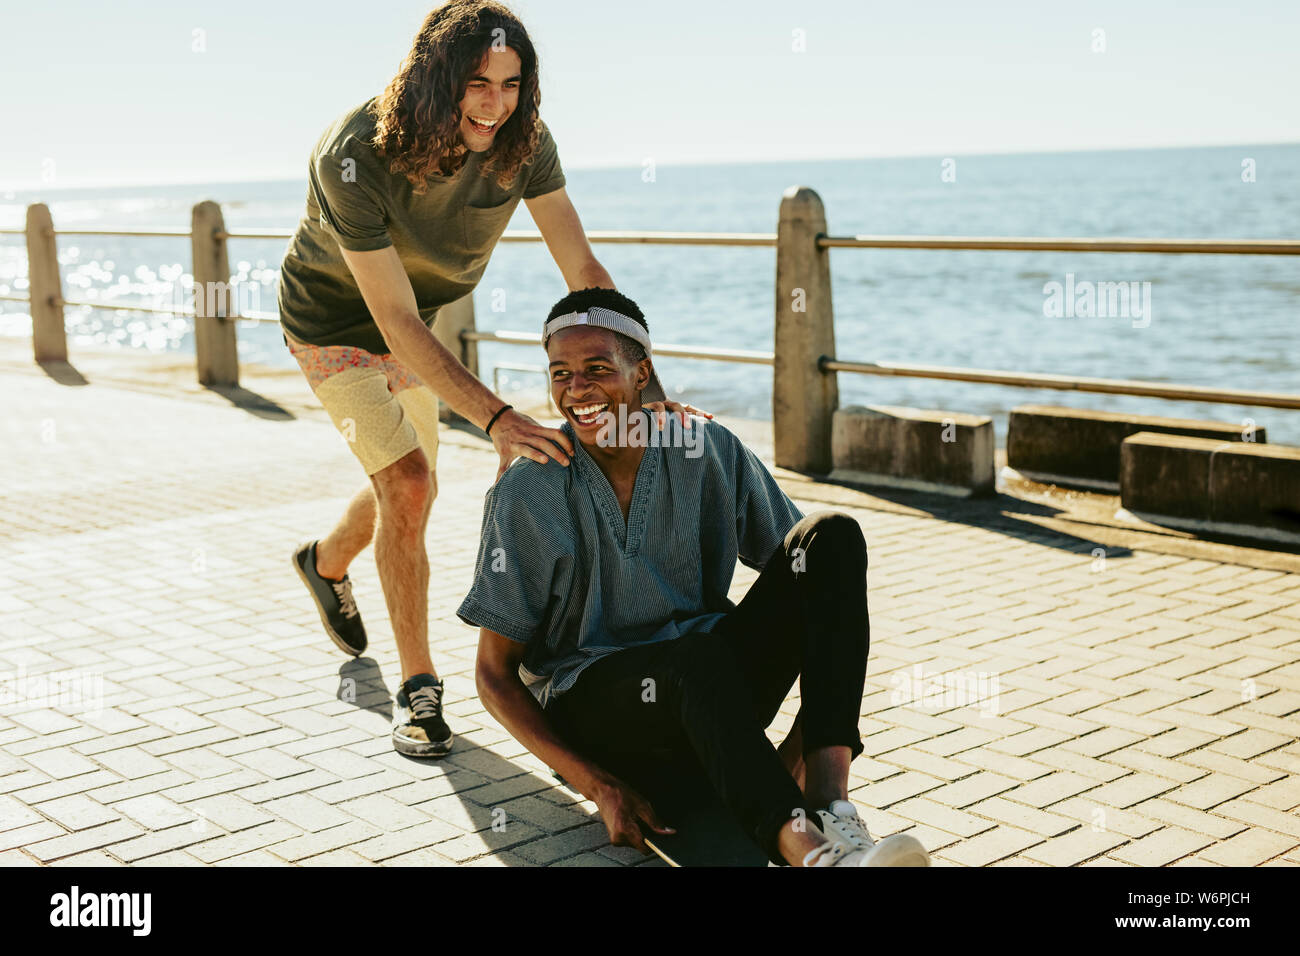 Young man being pushing on skateboard by his friend outdoors on road by the sea. Male friends having fun outdoors on a summer day. Stock Photo